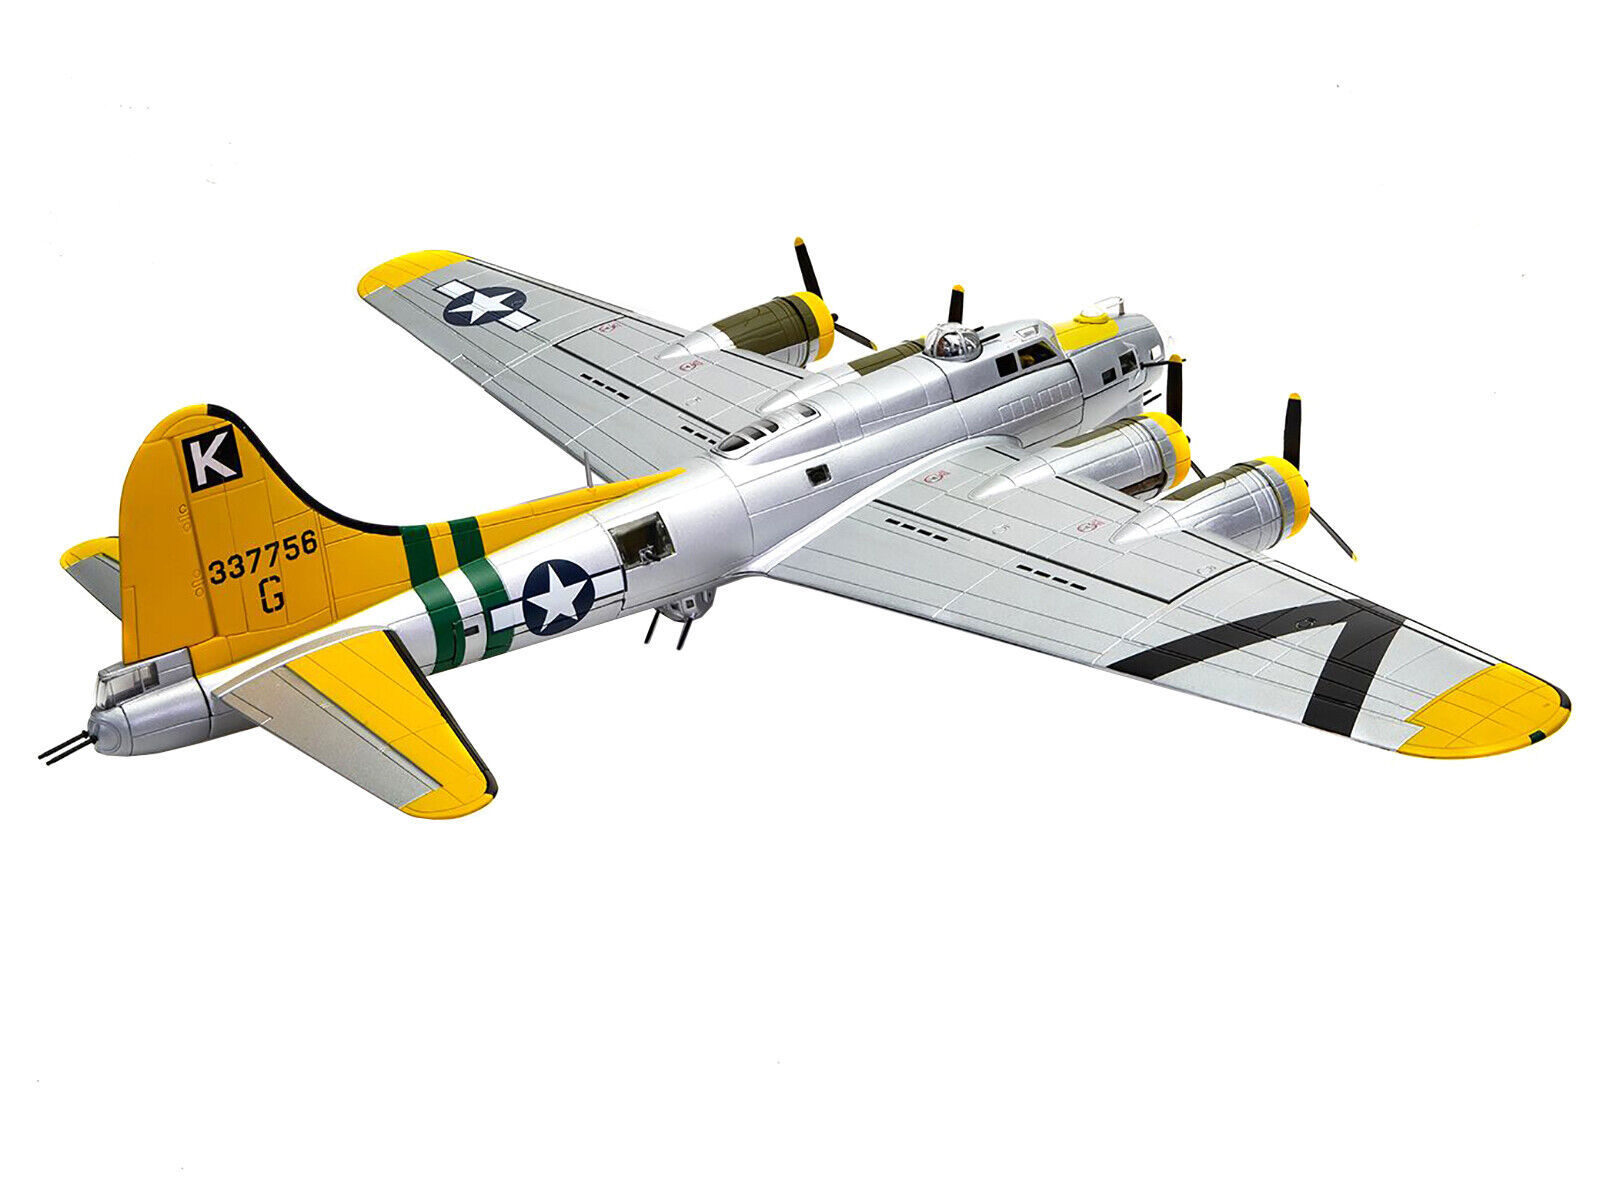 Boeing B-17G Flying Fortress Bomber Aircraft Milk Wagon 43-37756/G 708th BS/447t - $256.54